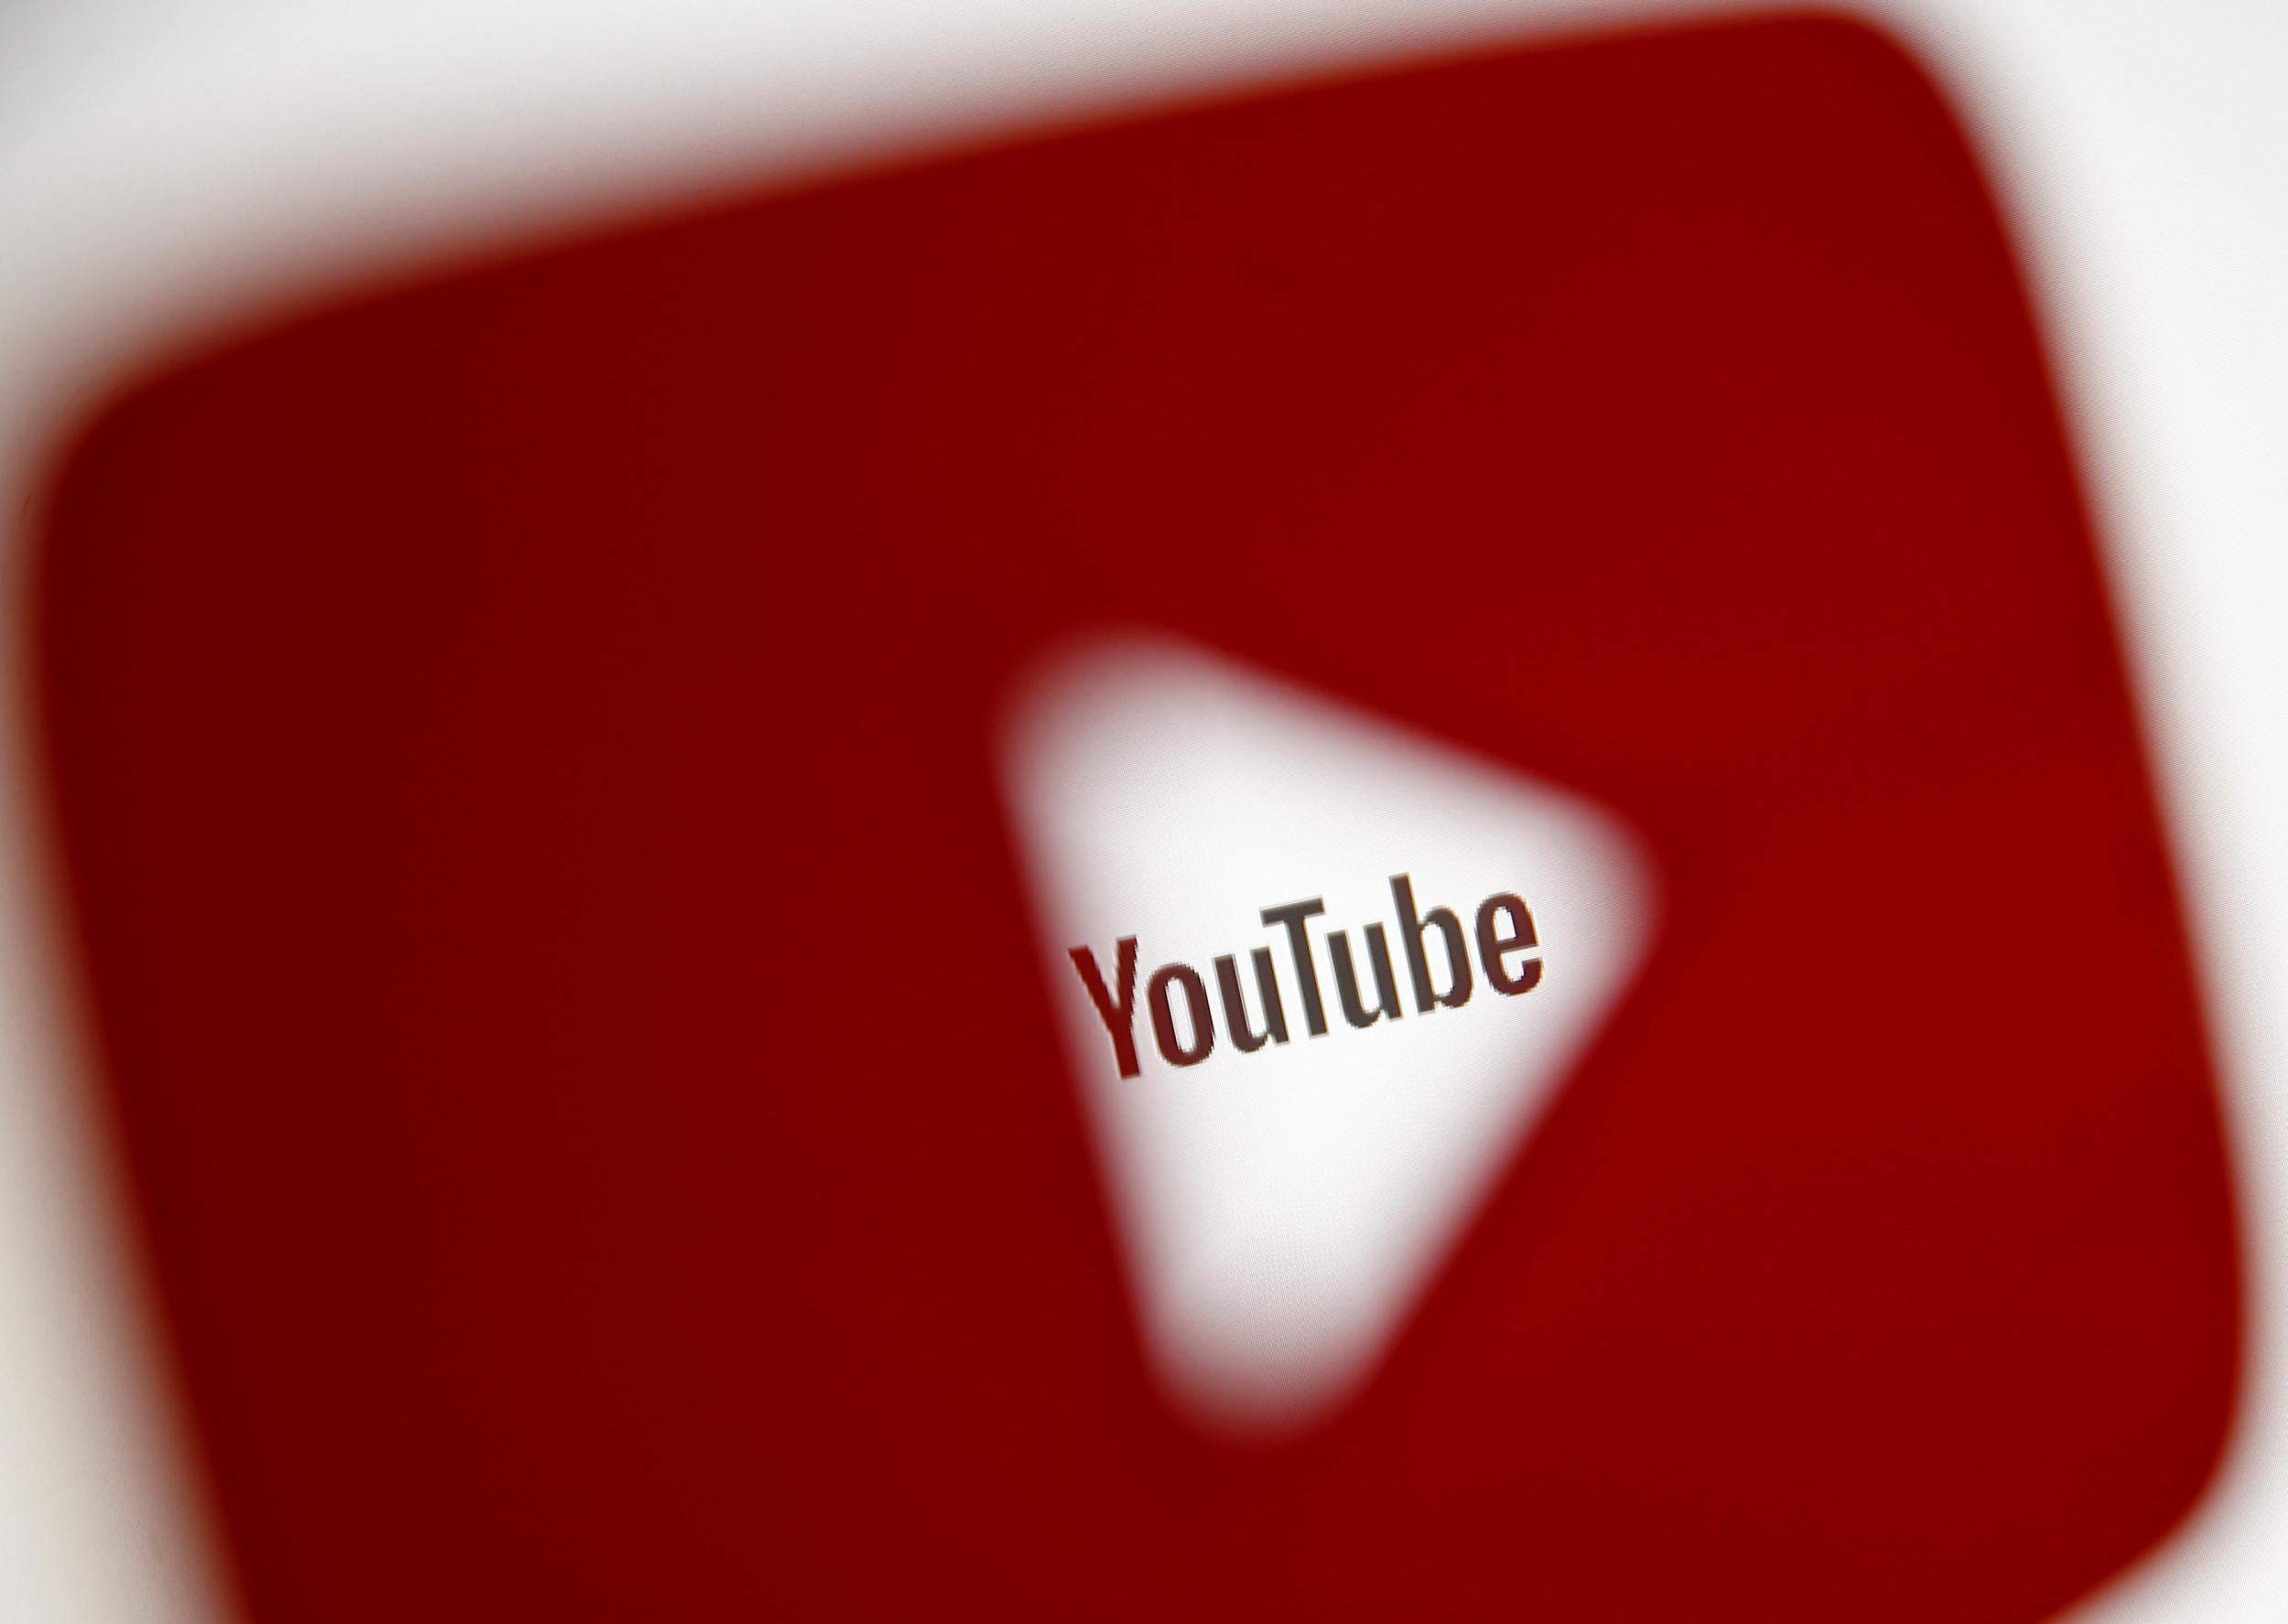 Consumer groups filed a complaint with federal officials warning that YouTube may be harvesting, analyzing, and selling children's data.